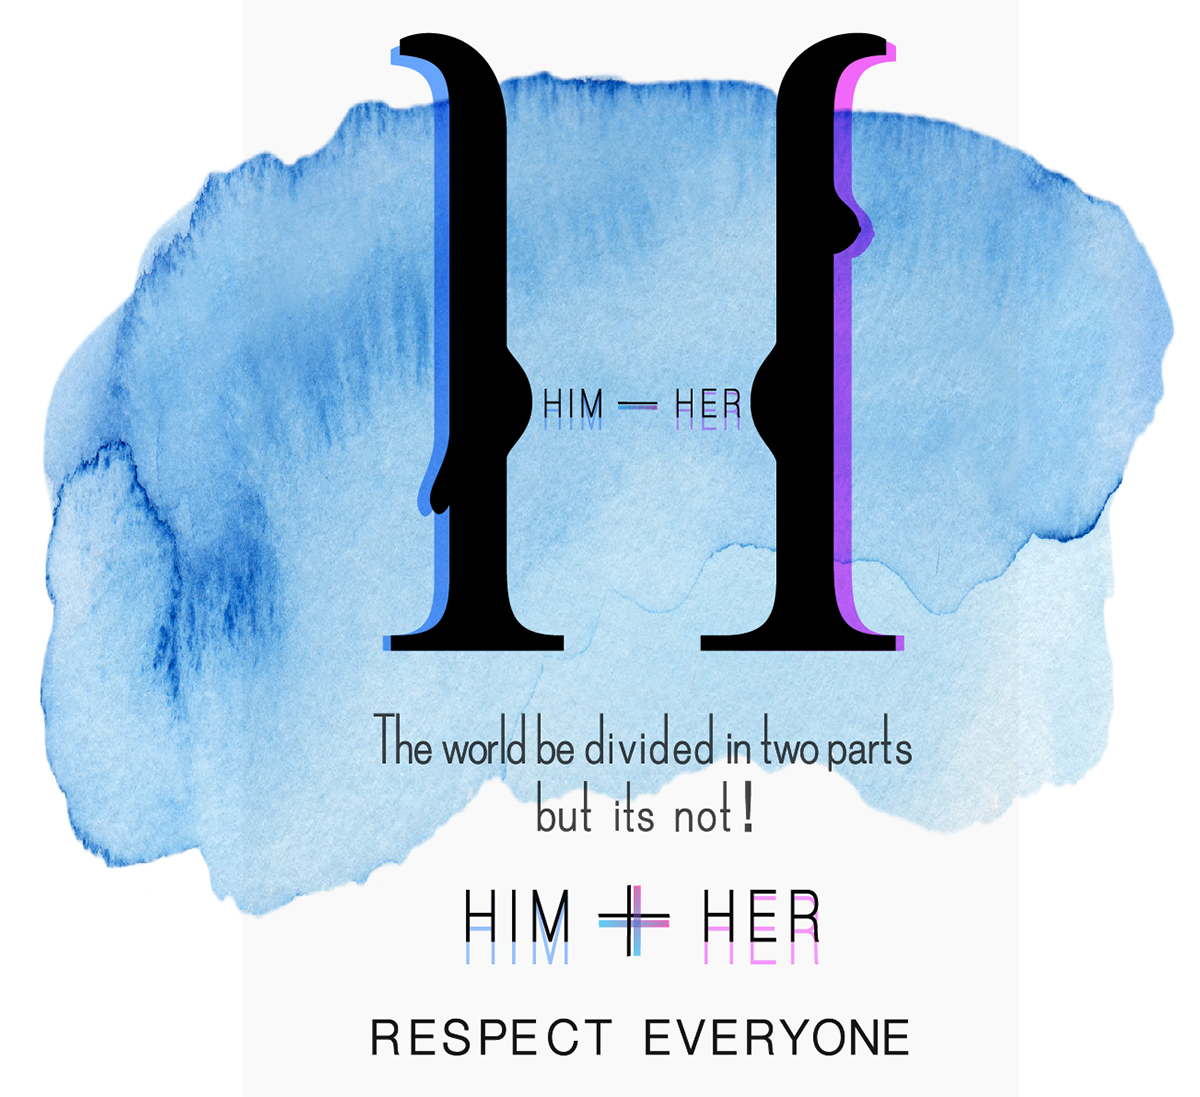 him her Gender equality for everyone Typeface typelover poster social cause